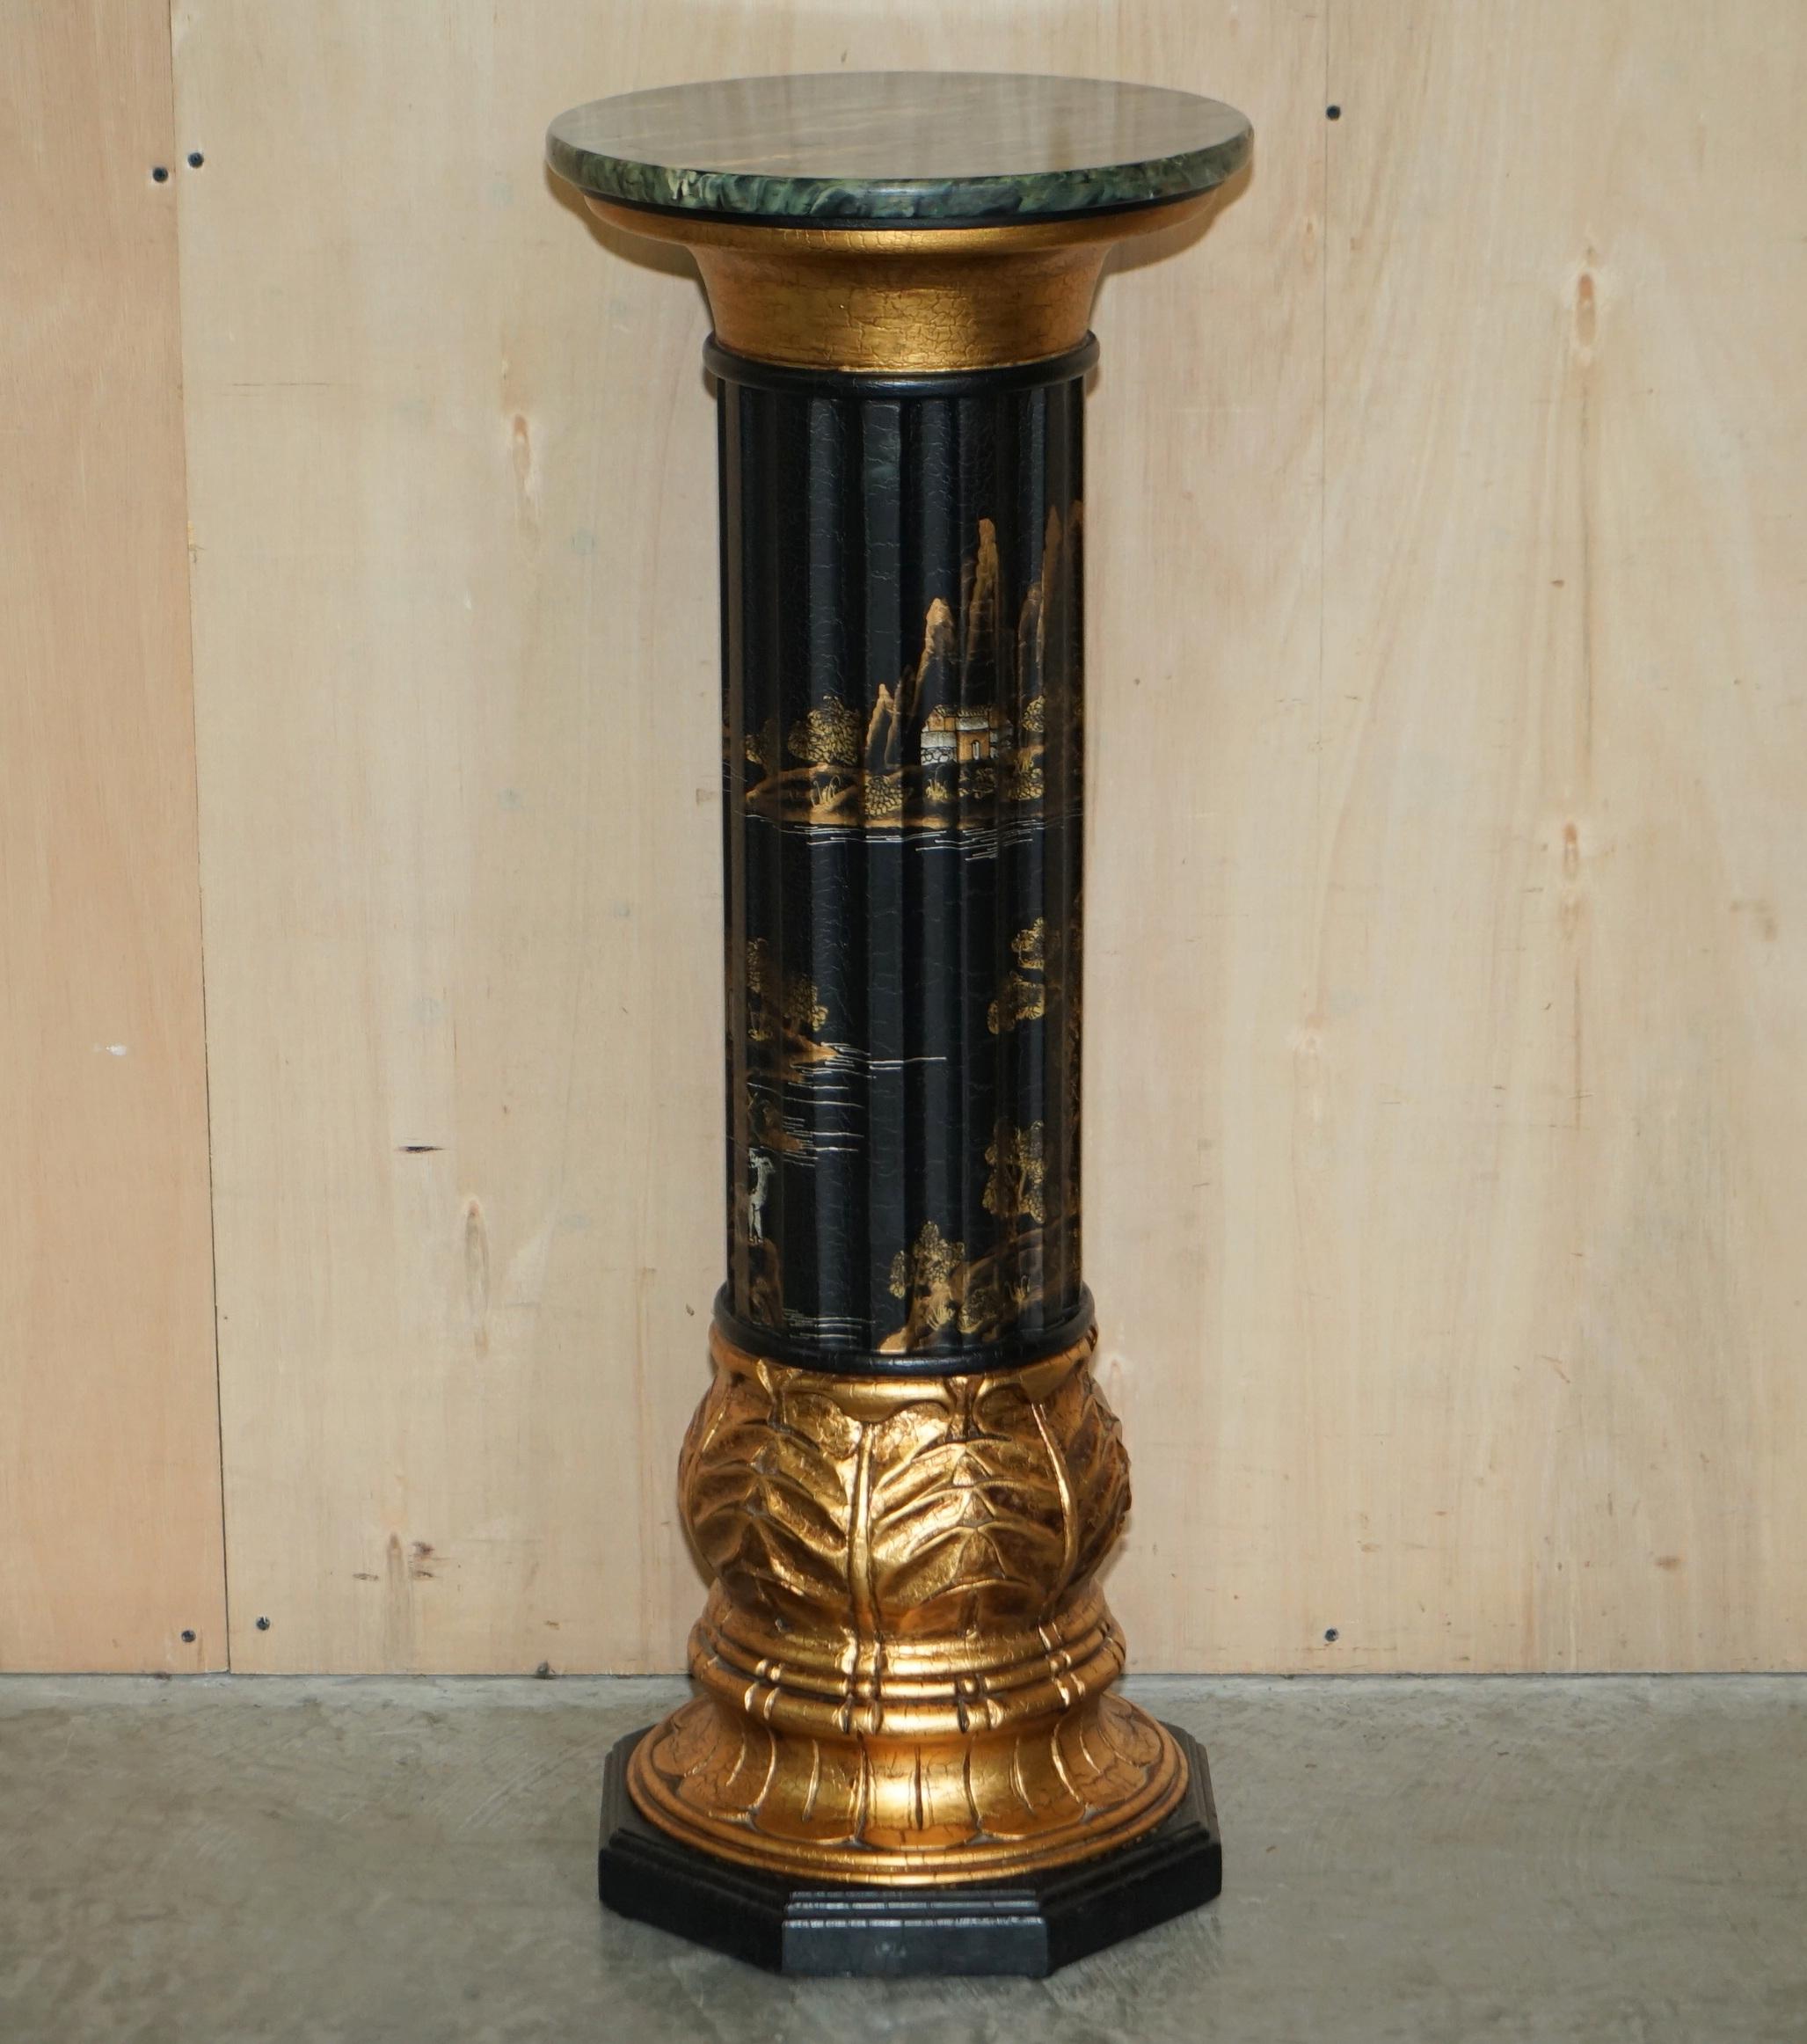 We are delighted to offer for sale this stunning pair of early 20th century circa 1920’s Neoclassical style Chinese Chinoiserie lacquered torchere columns.

These are quite simply the most decorative pillars I have ever seen. Usually these are